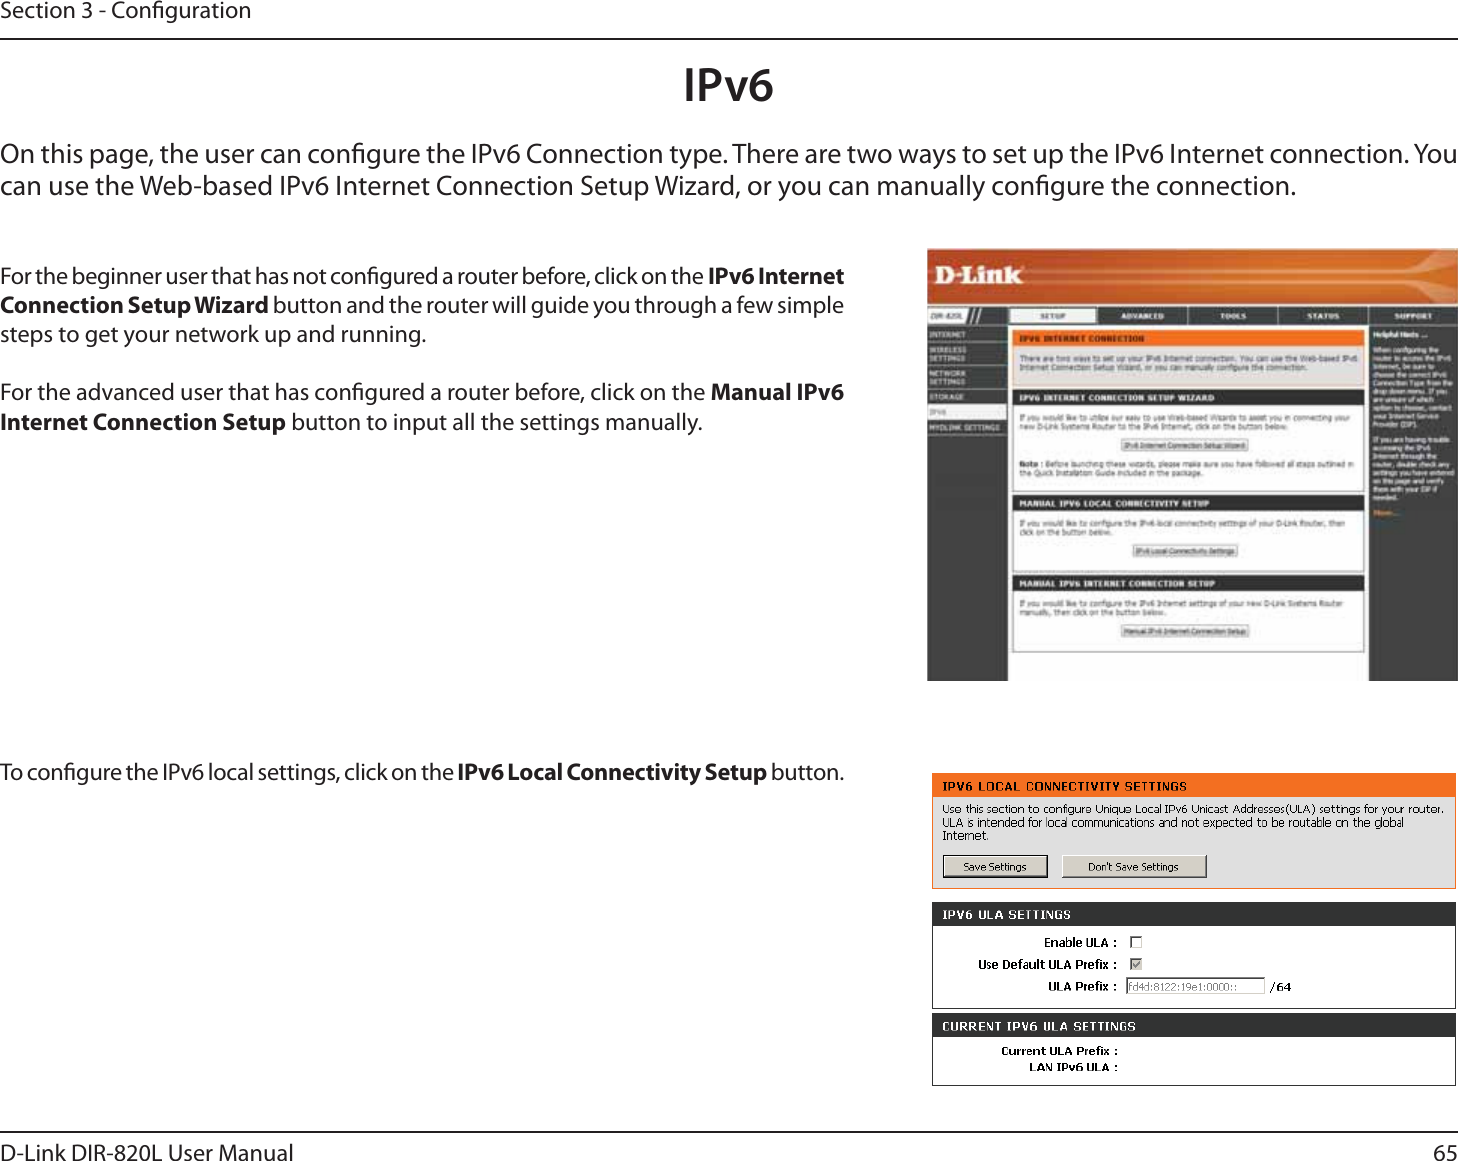 65D-Link DIR-820L User ManualSection 3 - CongurationIPv6On this page, the user can congure the IPv6 Connection type. There are two ways to set up the IPv6 Internet connection. You can use the Web-based IPv6 Internet Connection Setup Wizard, or you can manually congure the connection.For the beginner user that has not congured a router before, click on the IPv6 Internet Connection Setup Wizard button and the router will guide you through a few simple steps to get your network up and running.For the advanced user that has congured a router before, click on the Manual IPv6 Internet Connection Setup button to input all the settings manually.To congure the IPv6 local settings, click on the IPv6 Local Connectivity Setup button.